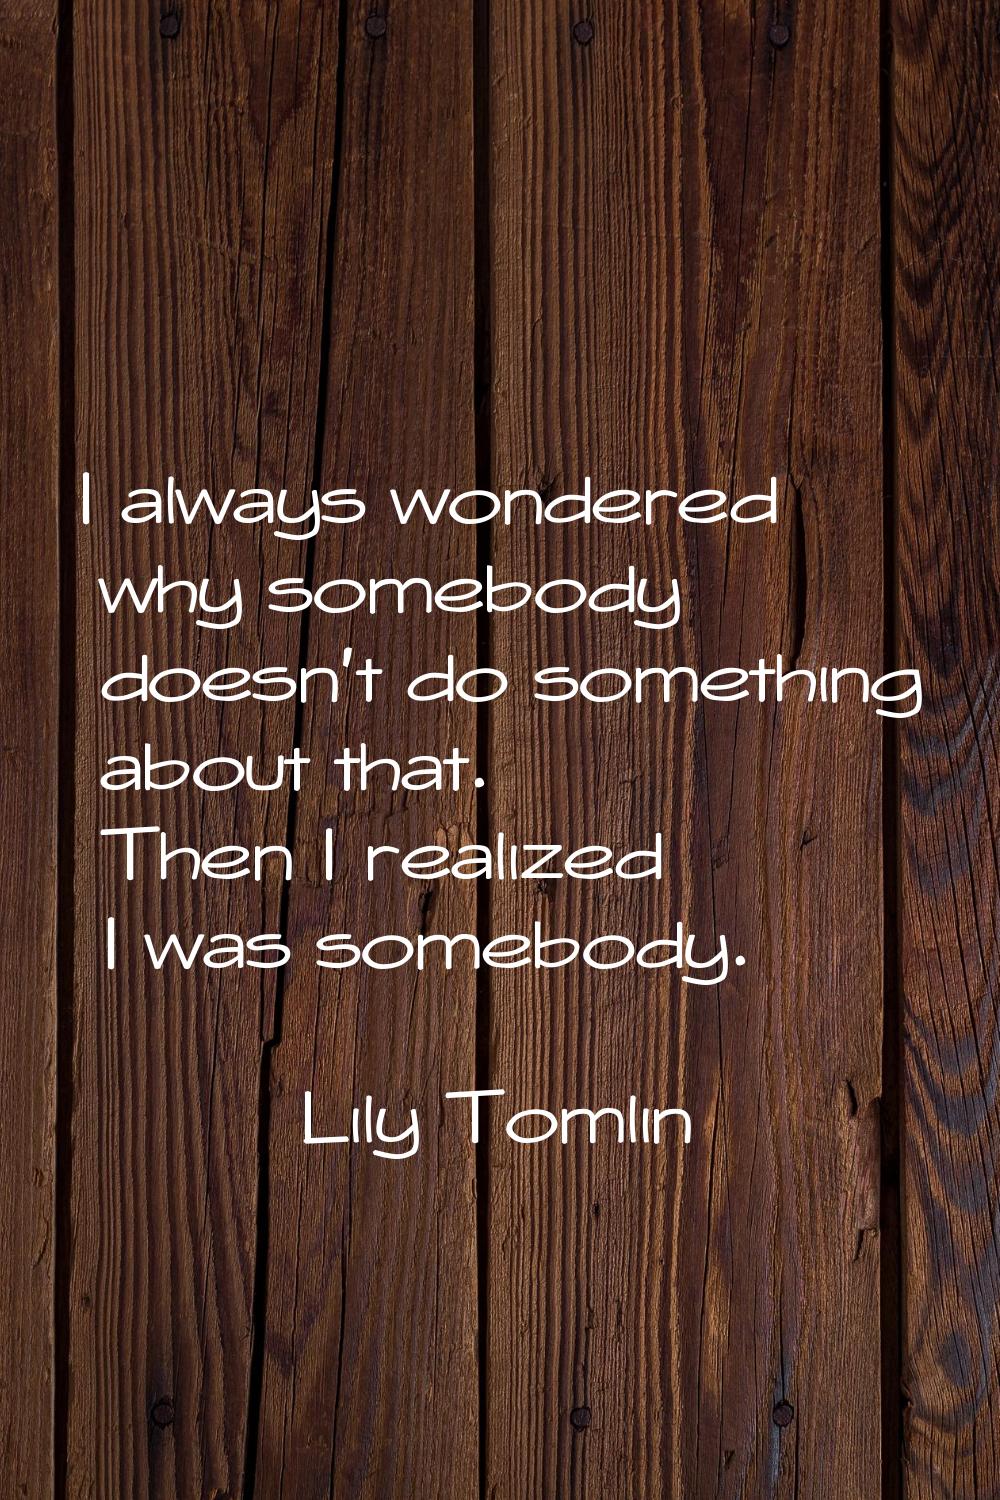 I always wondered why somebody doesn't do something about that. Then I realized I was somebody.